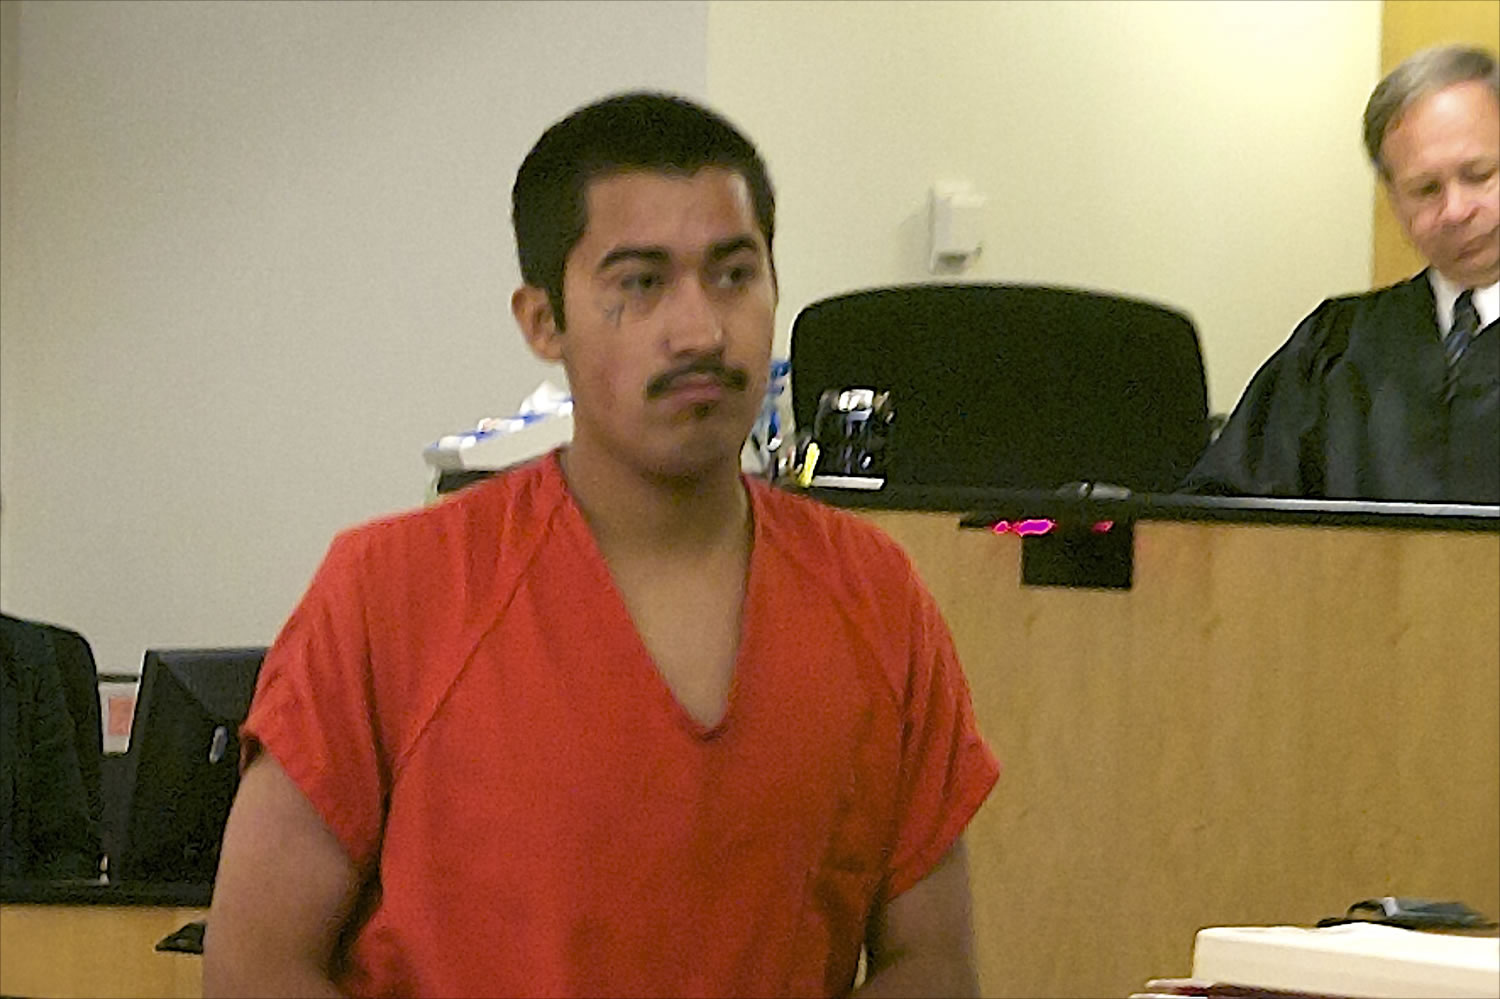 Shooting suspect Jeremy Pina made his first appearance in Clark County Superior Court on Tuesday on suspicion of attempted first-degree murder.